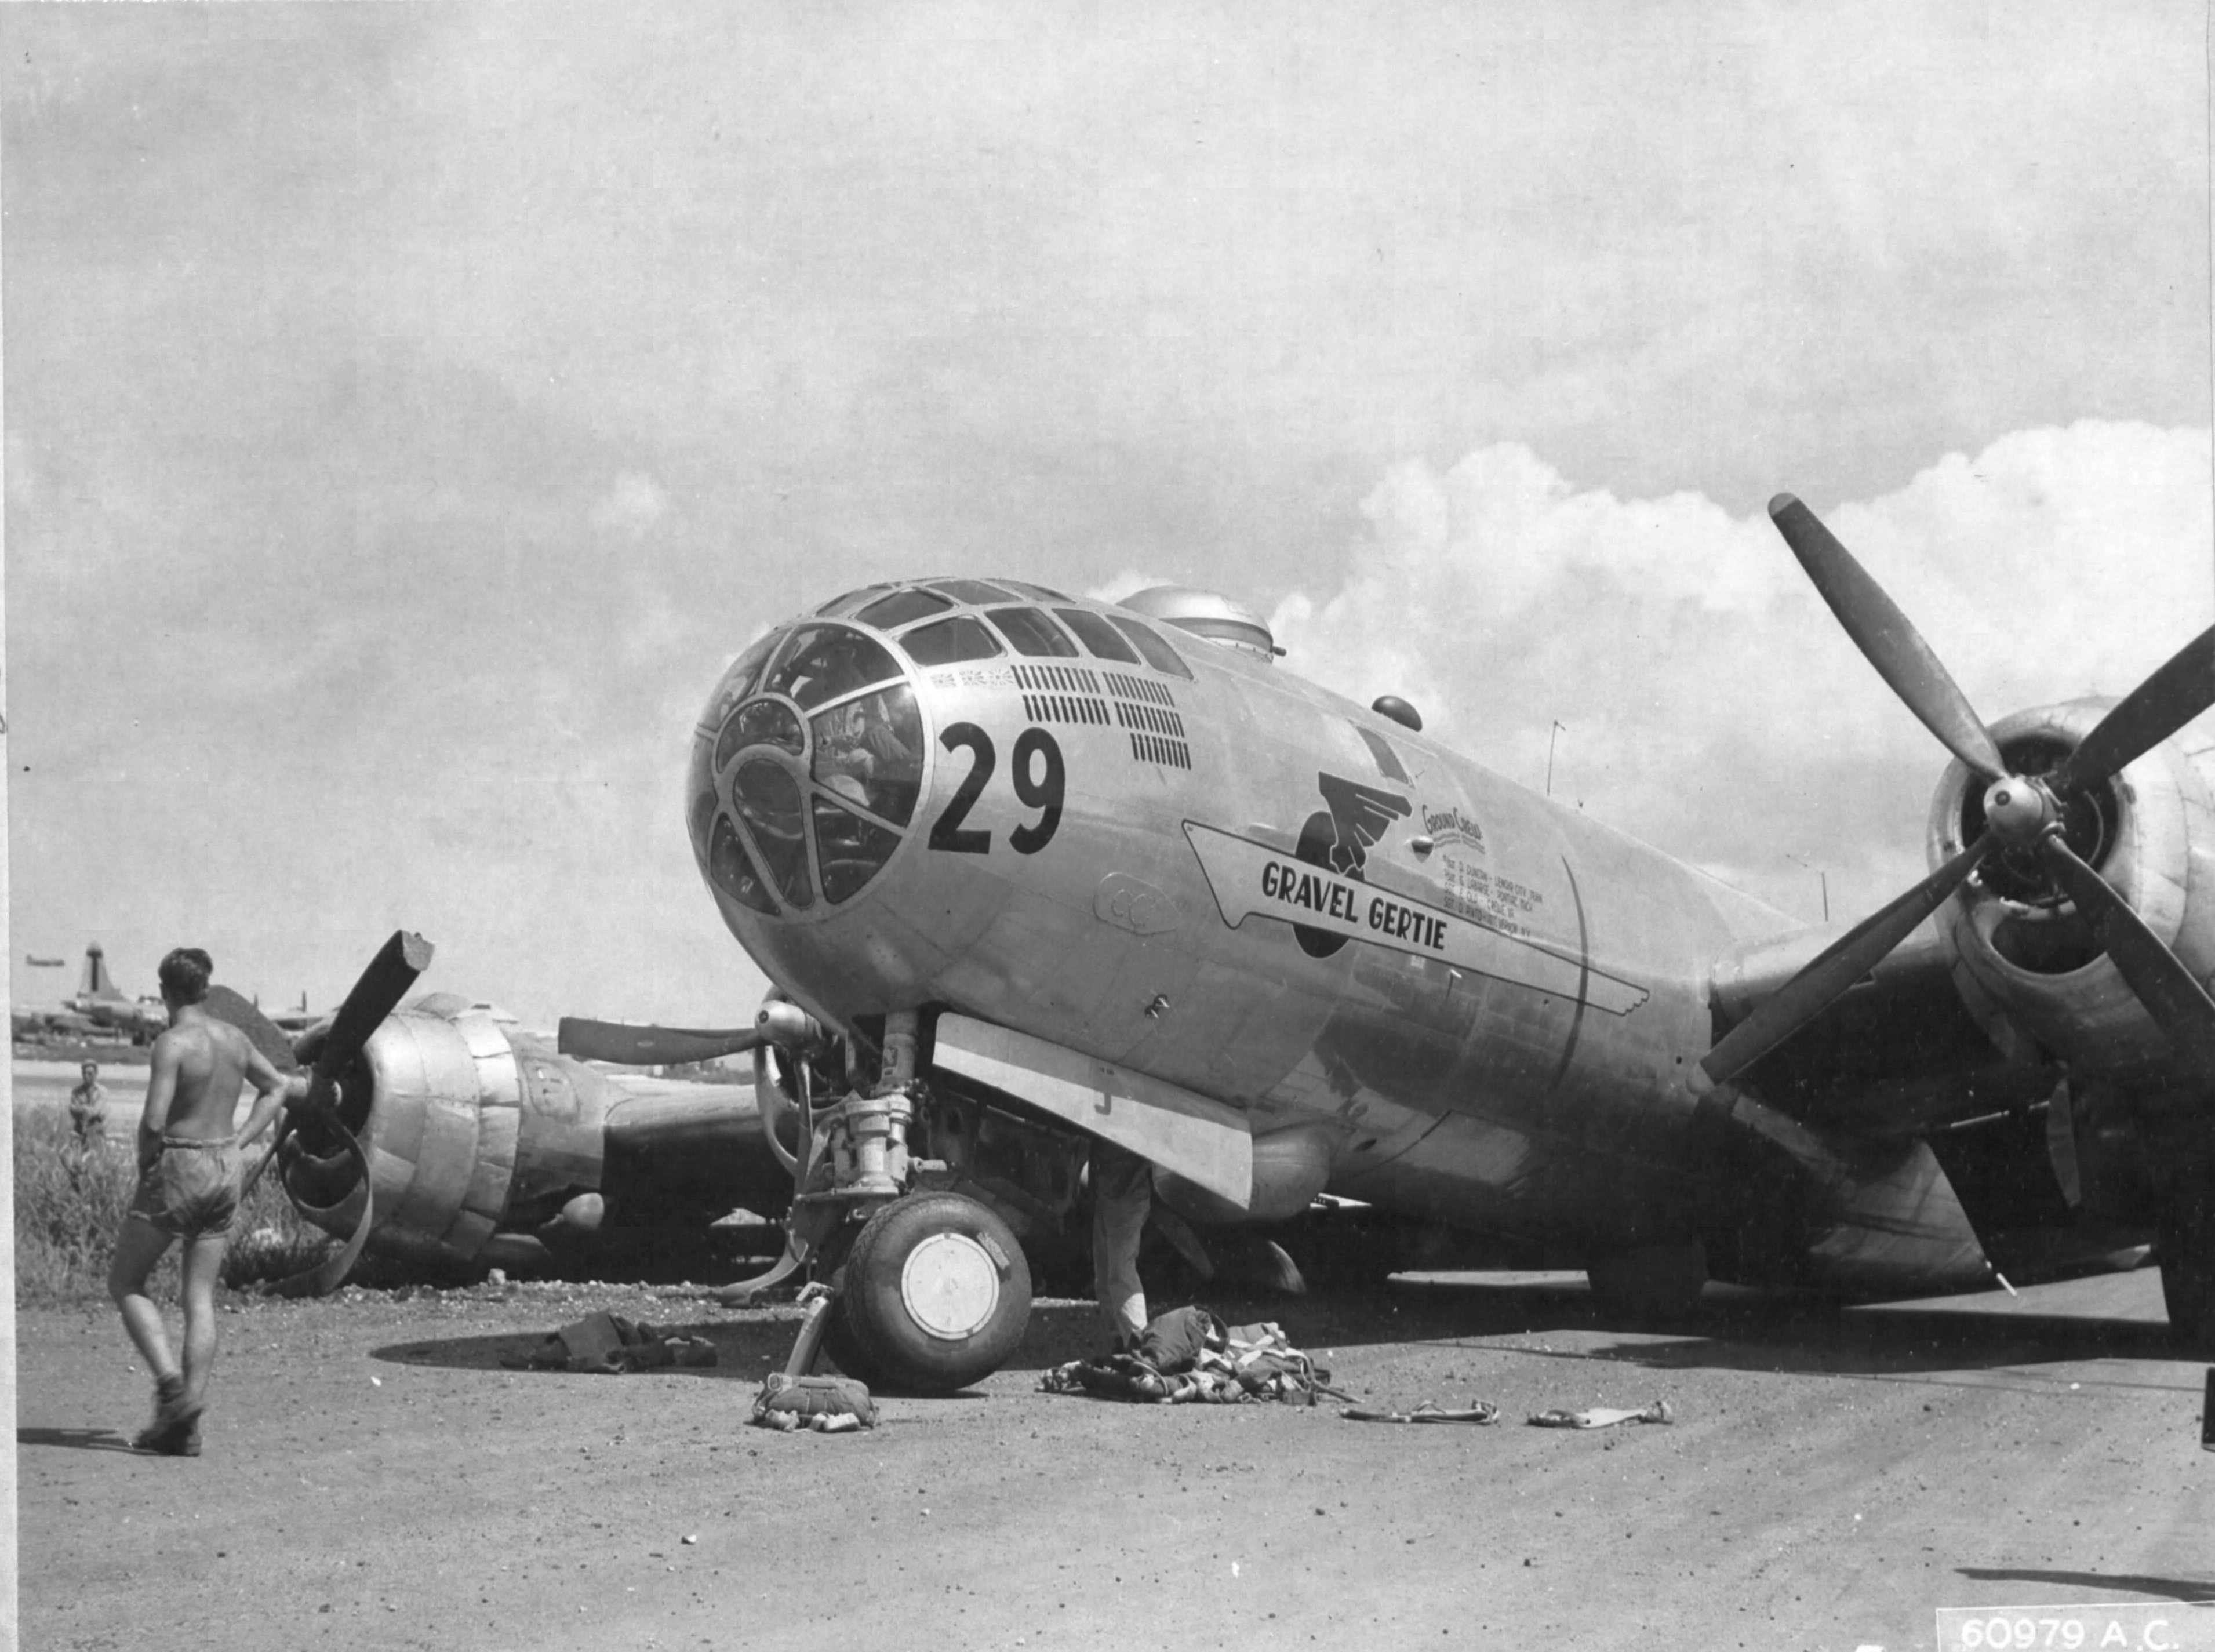 B-29 Superfortress “Gravel Gertie” with the 882nd Bomb Squadron squats on the runway after suffering a main landing gear collapse, Isley Field, Saipan, Aug 6 1945